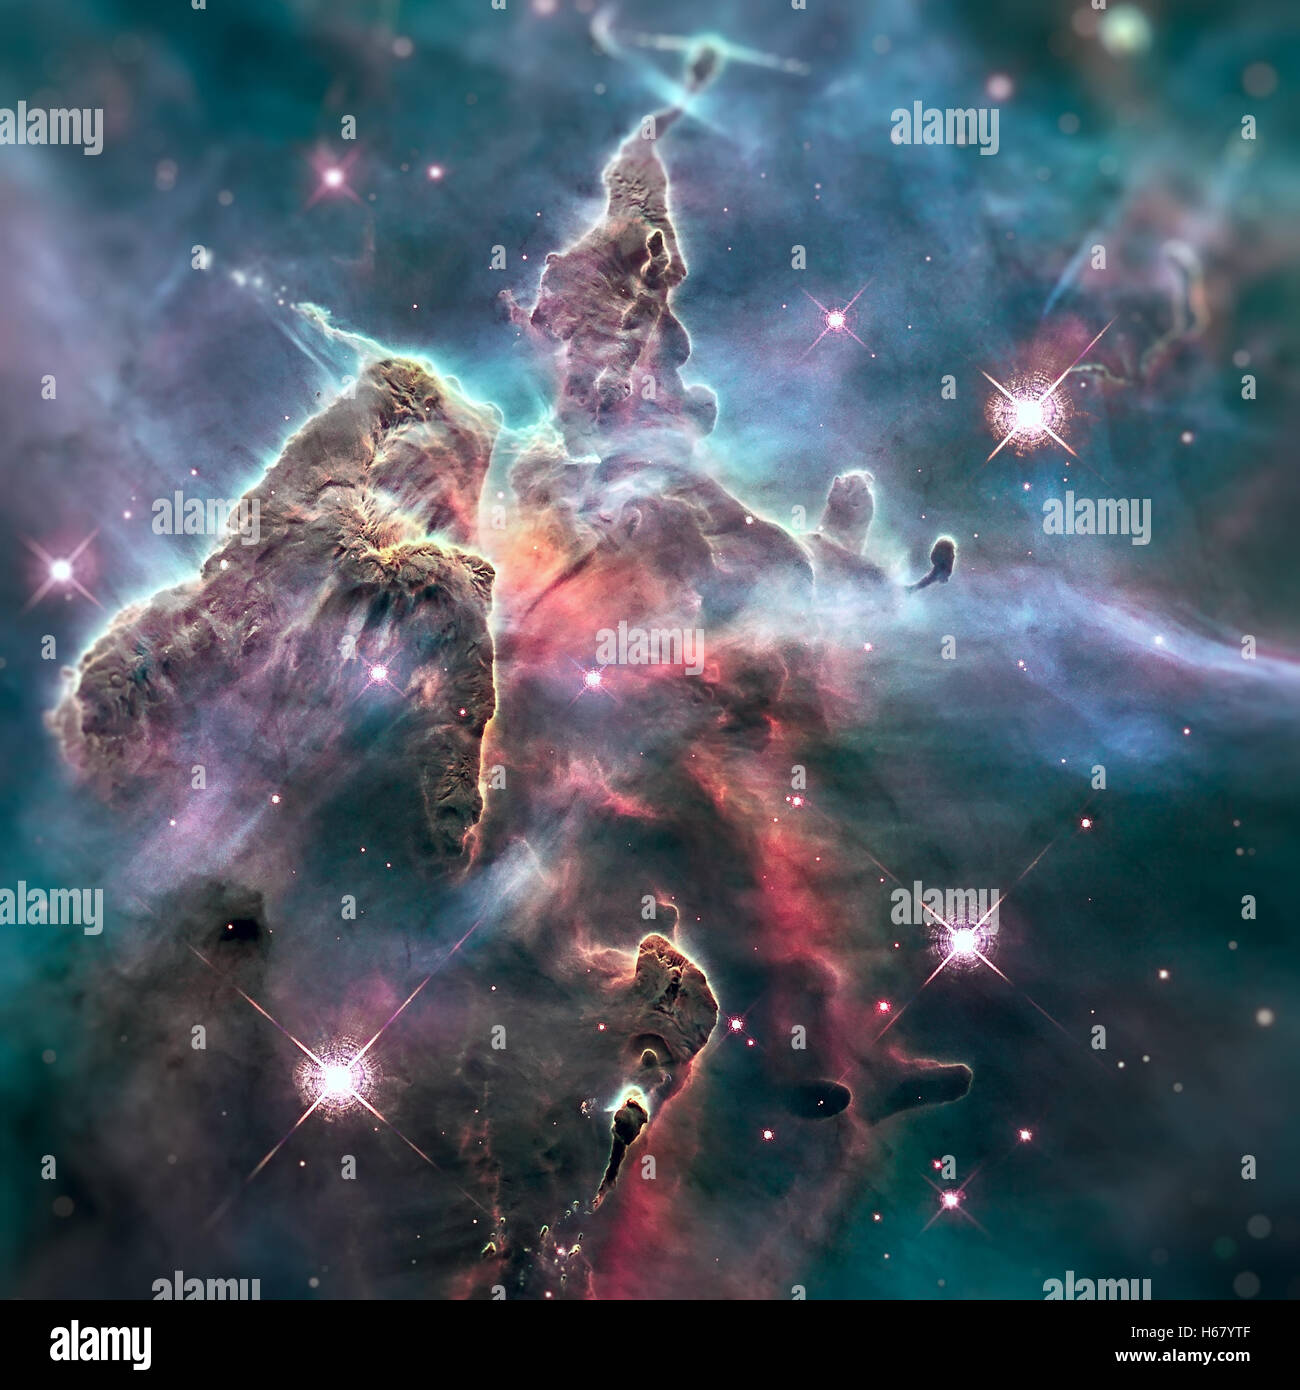 Mystic Mountain. Region in the Carina Nebula imaged by the Hubble Space Telescope. Elements of this image furnished by NASA. Stock Photo